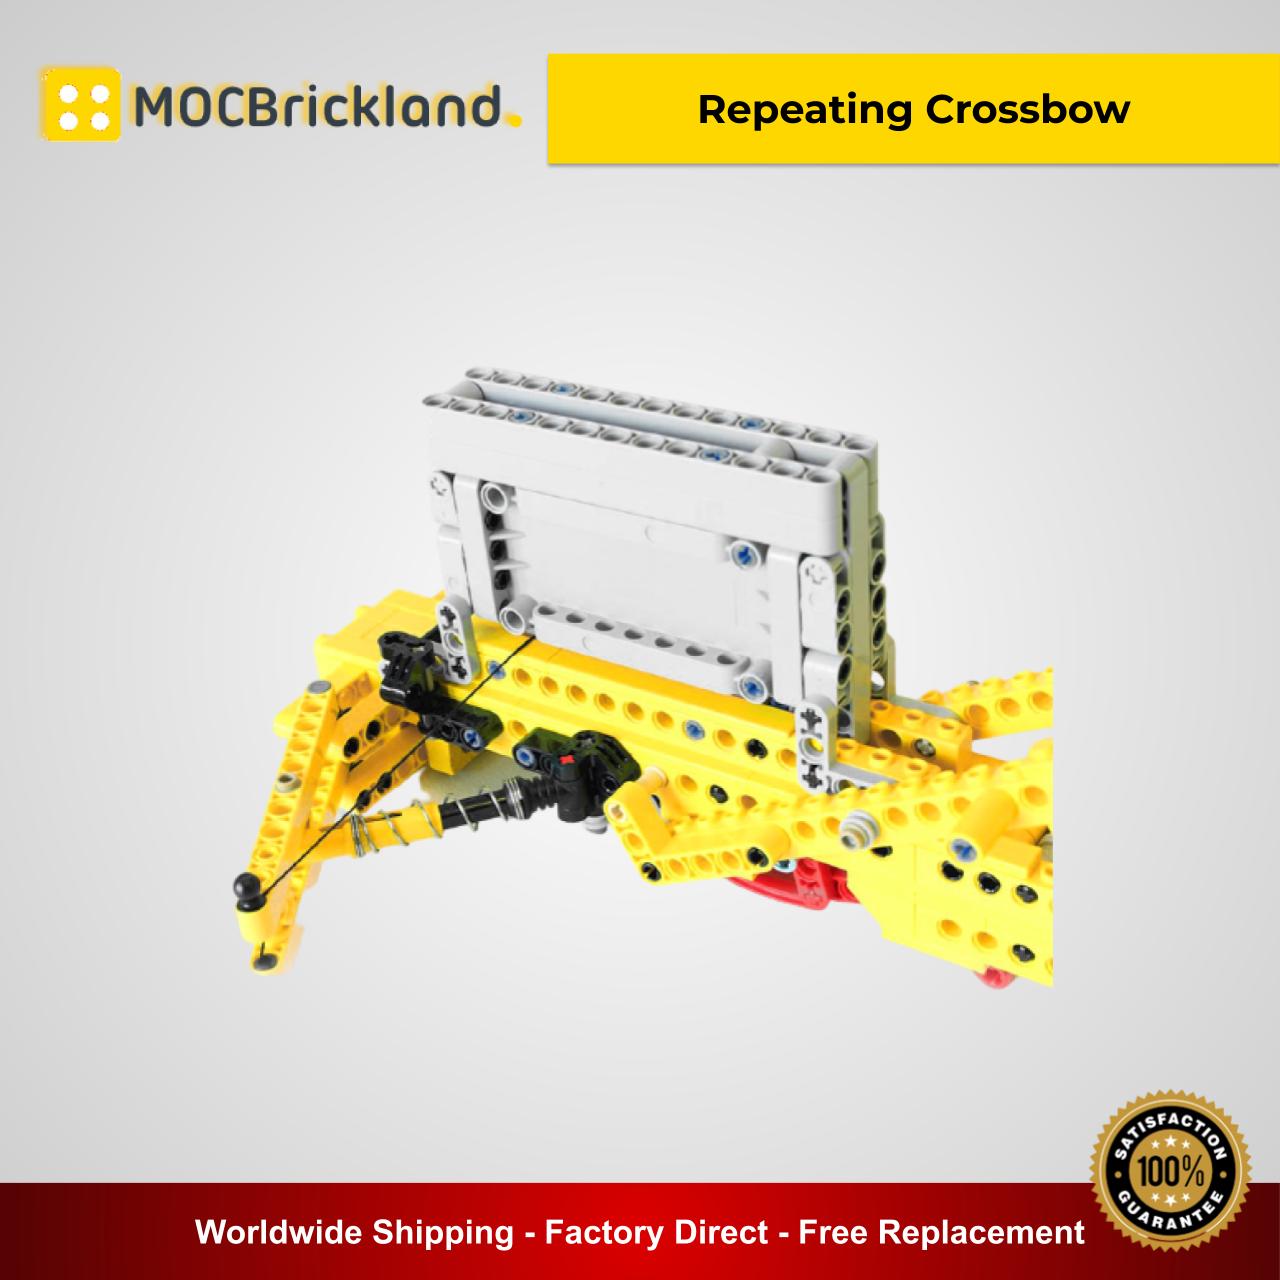 technic moc 9058 repeating crossbow by nico71 mocbrickland 2809